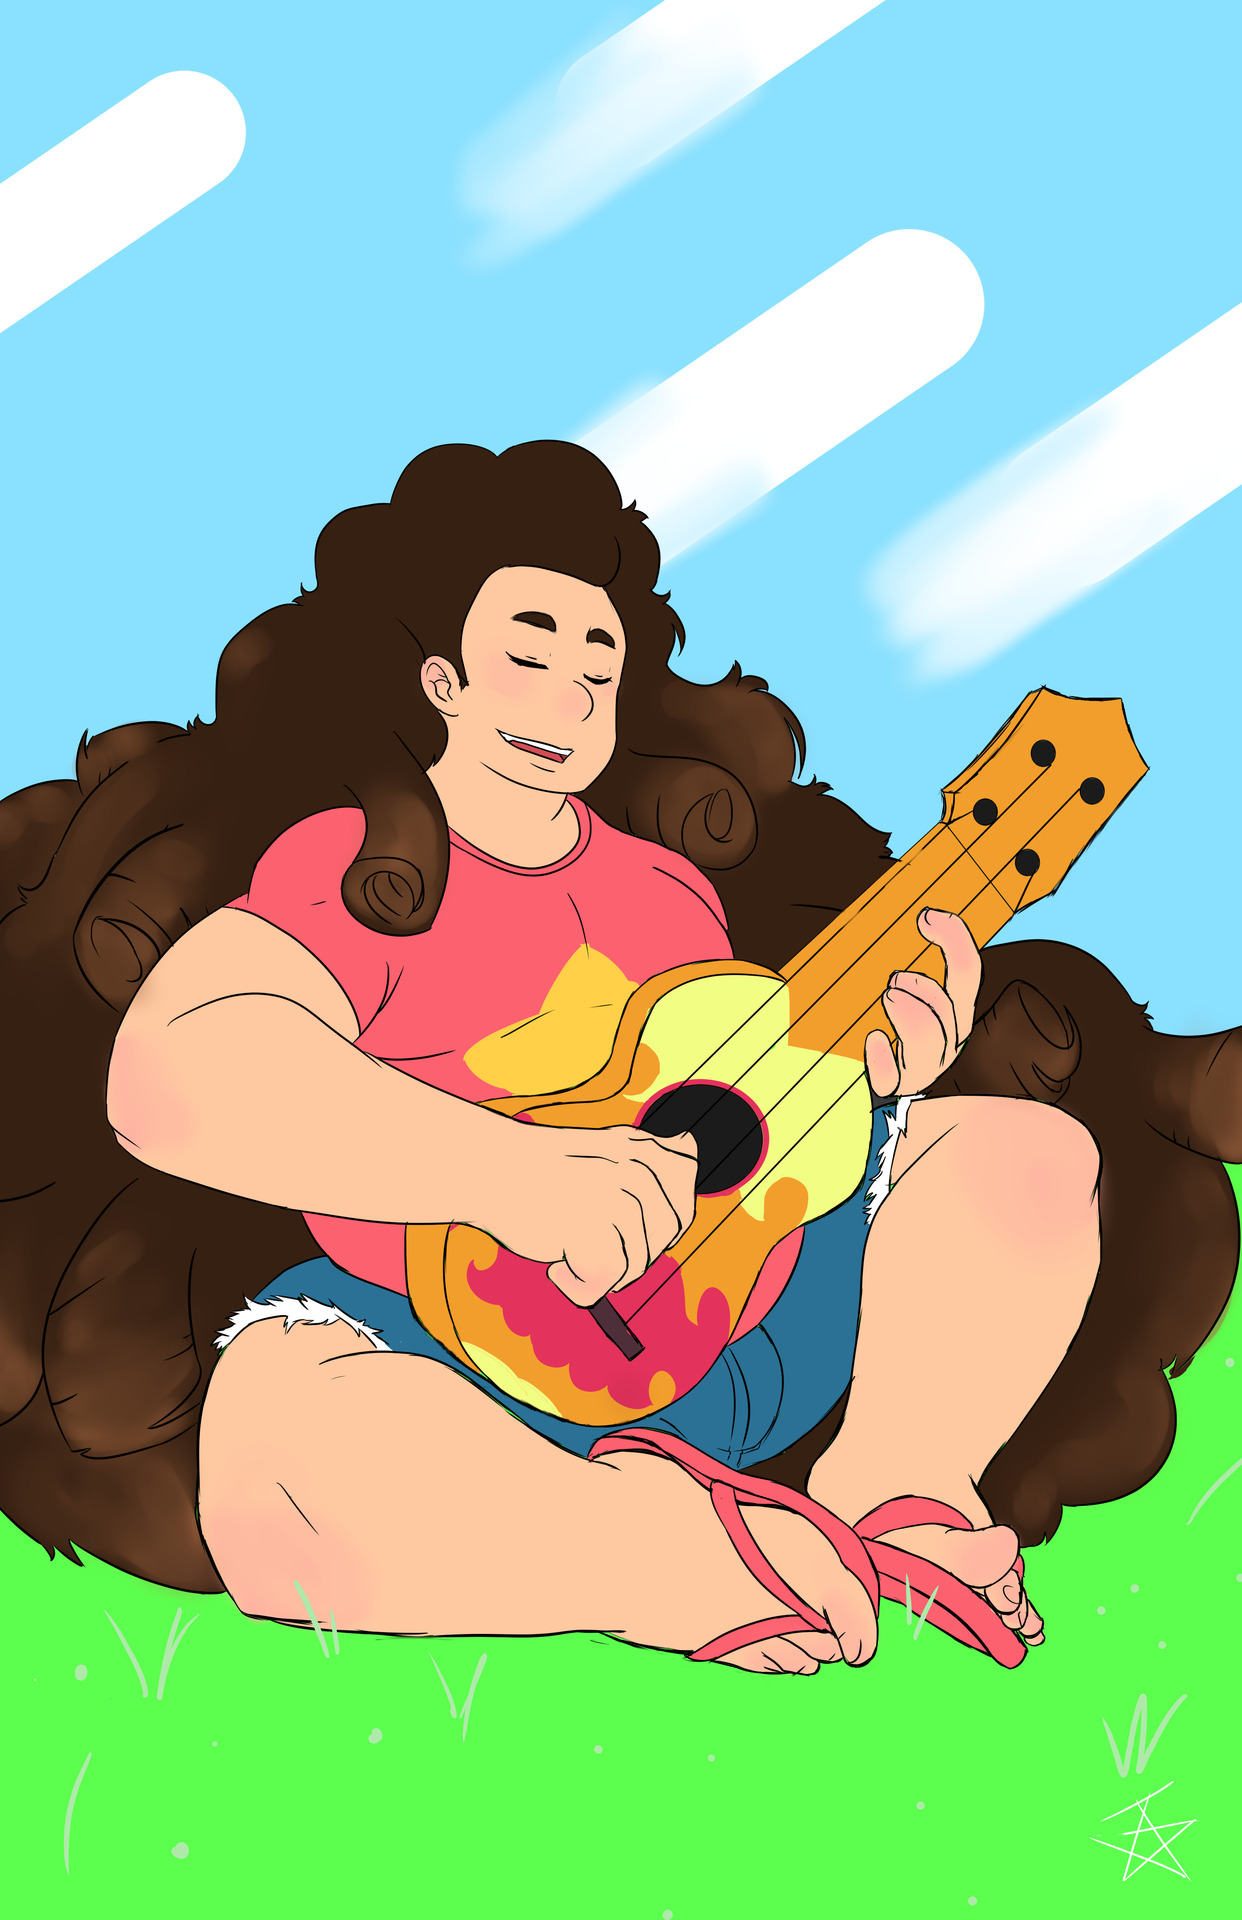 Hey guys sorry I haven’t uploaded in awhile. Here’s an adult Steven because i believe his genes will reflect Rose Quartz and not Pink Diamond. So I drew it.